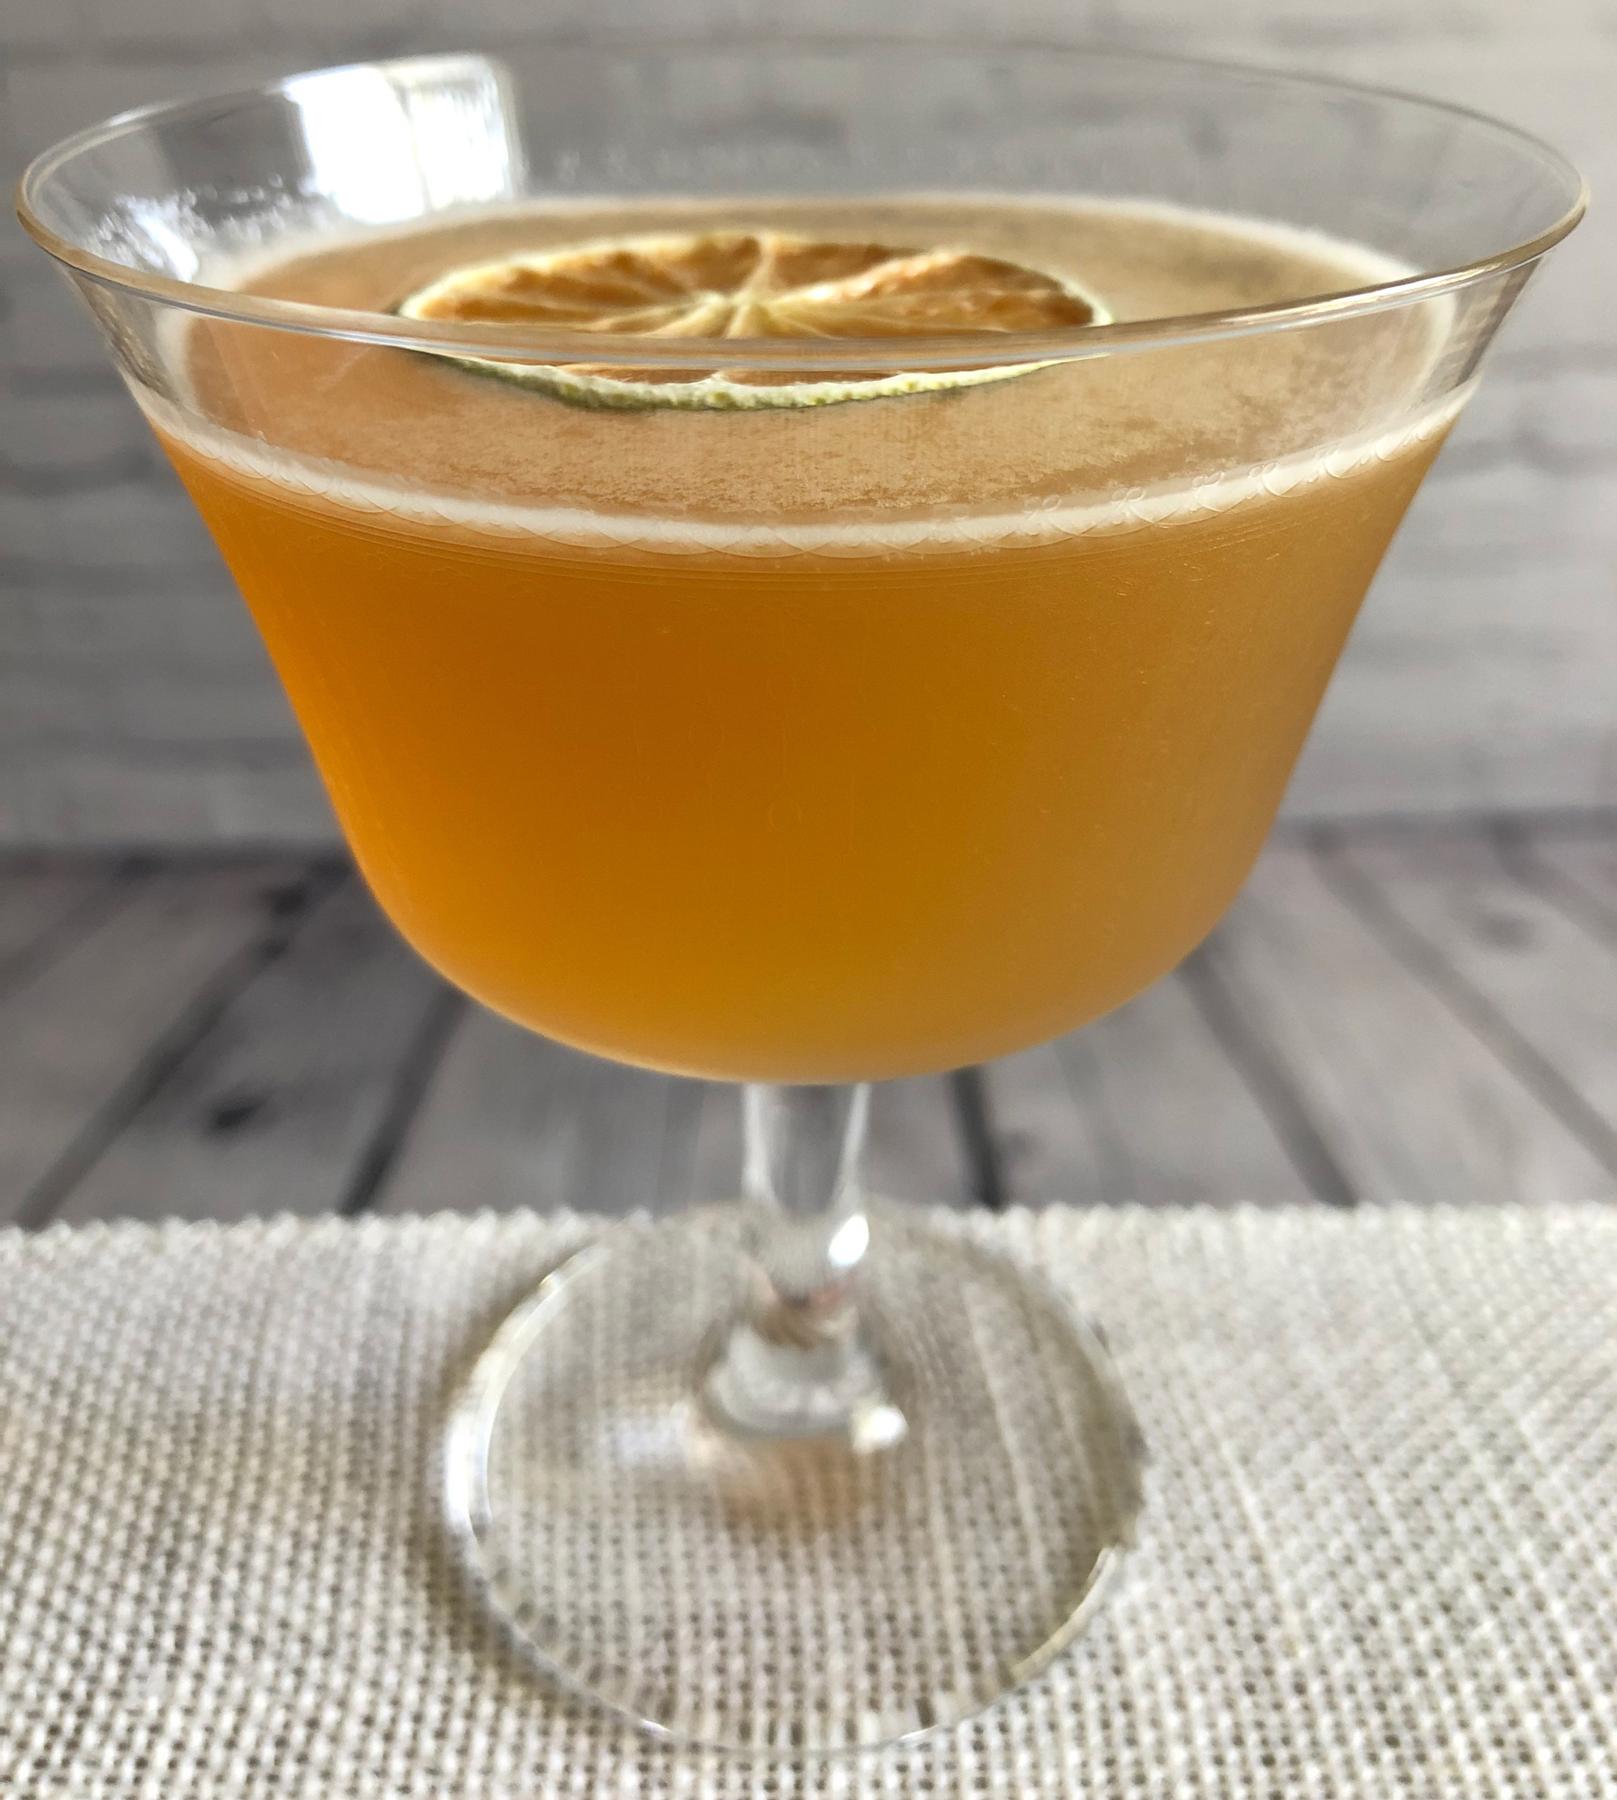 An example of the The Doctor, the mixed drink (drink) featuring KRONAN Swedish Punsch, Smith & Cross Traditional Jamaica Rum, lime juice, and lime wheel; photo by Lee Edwards